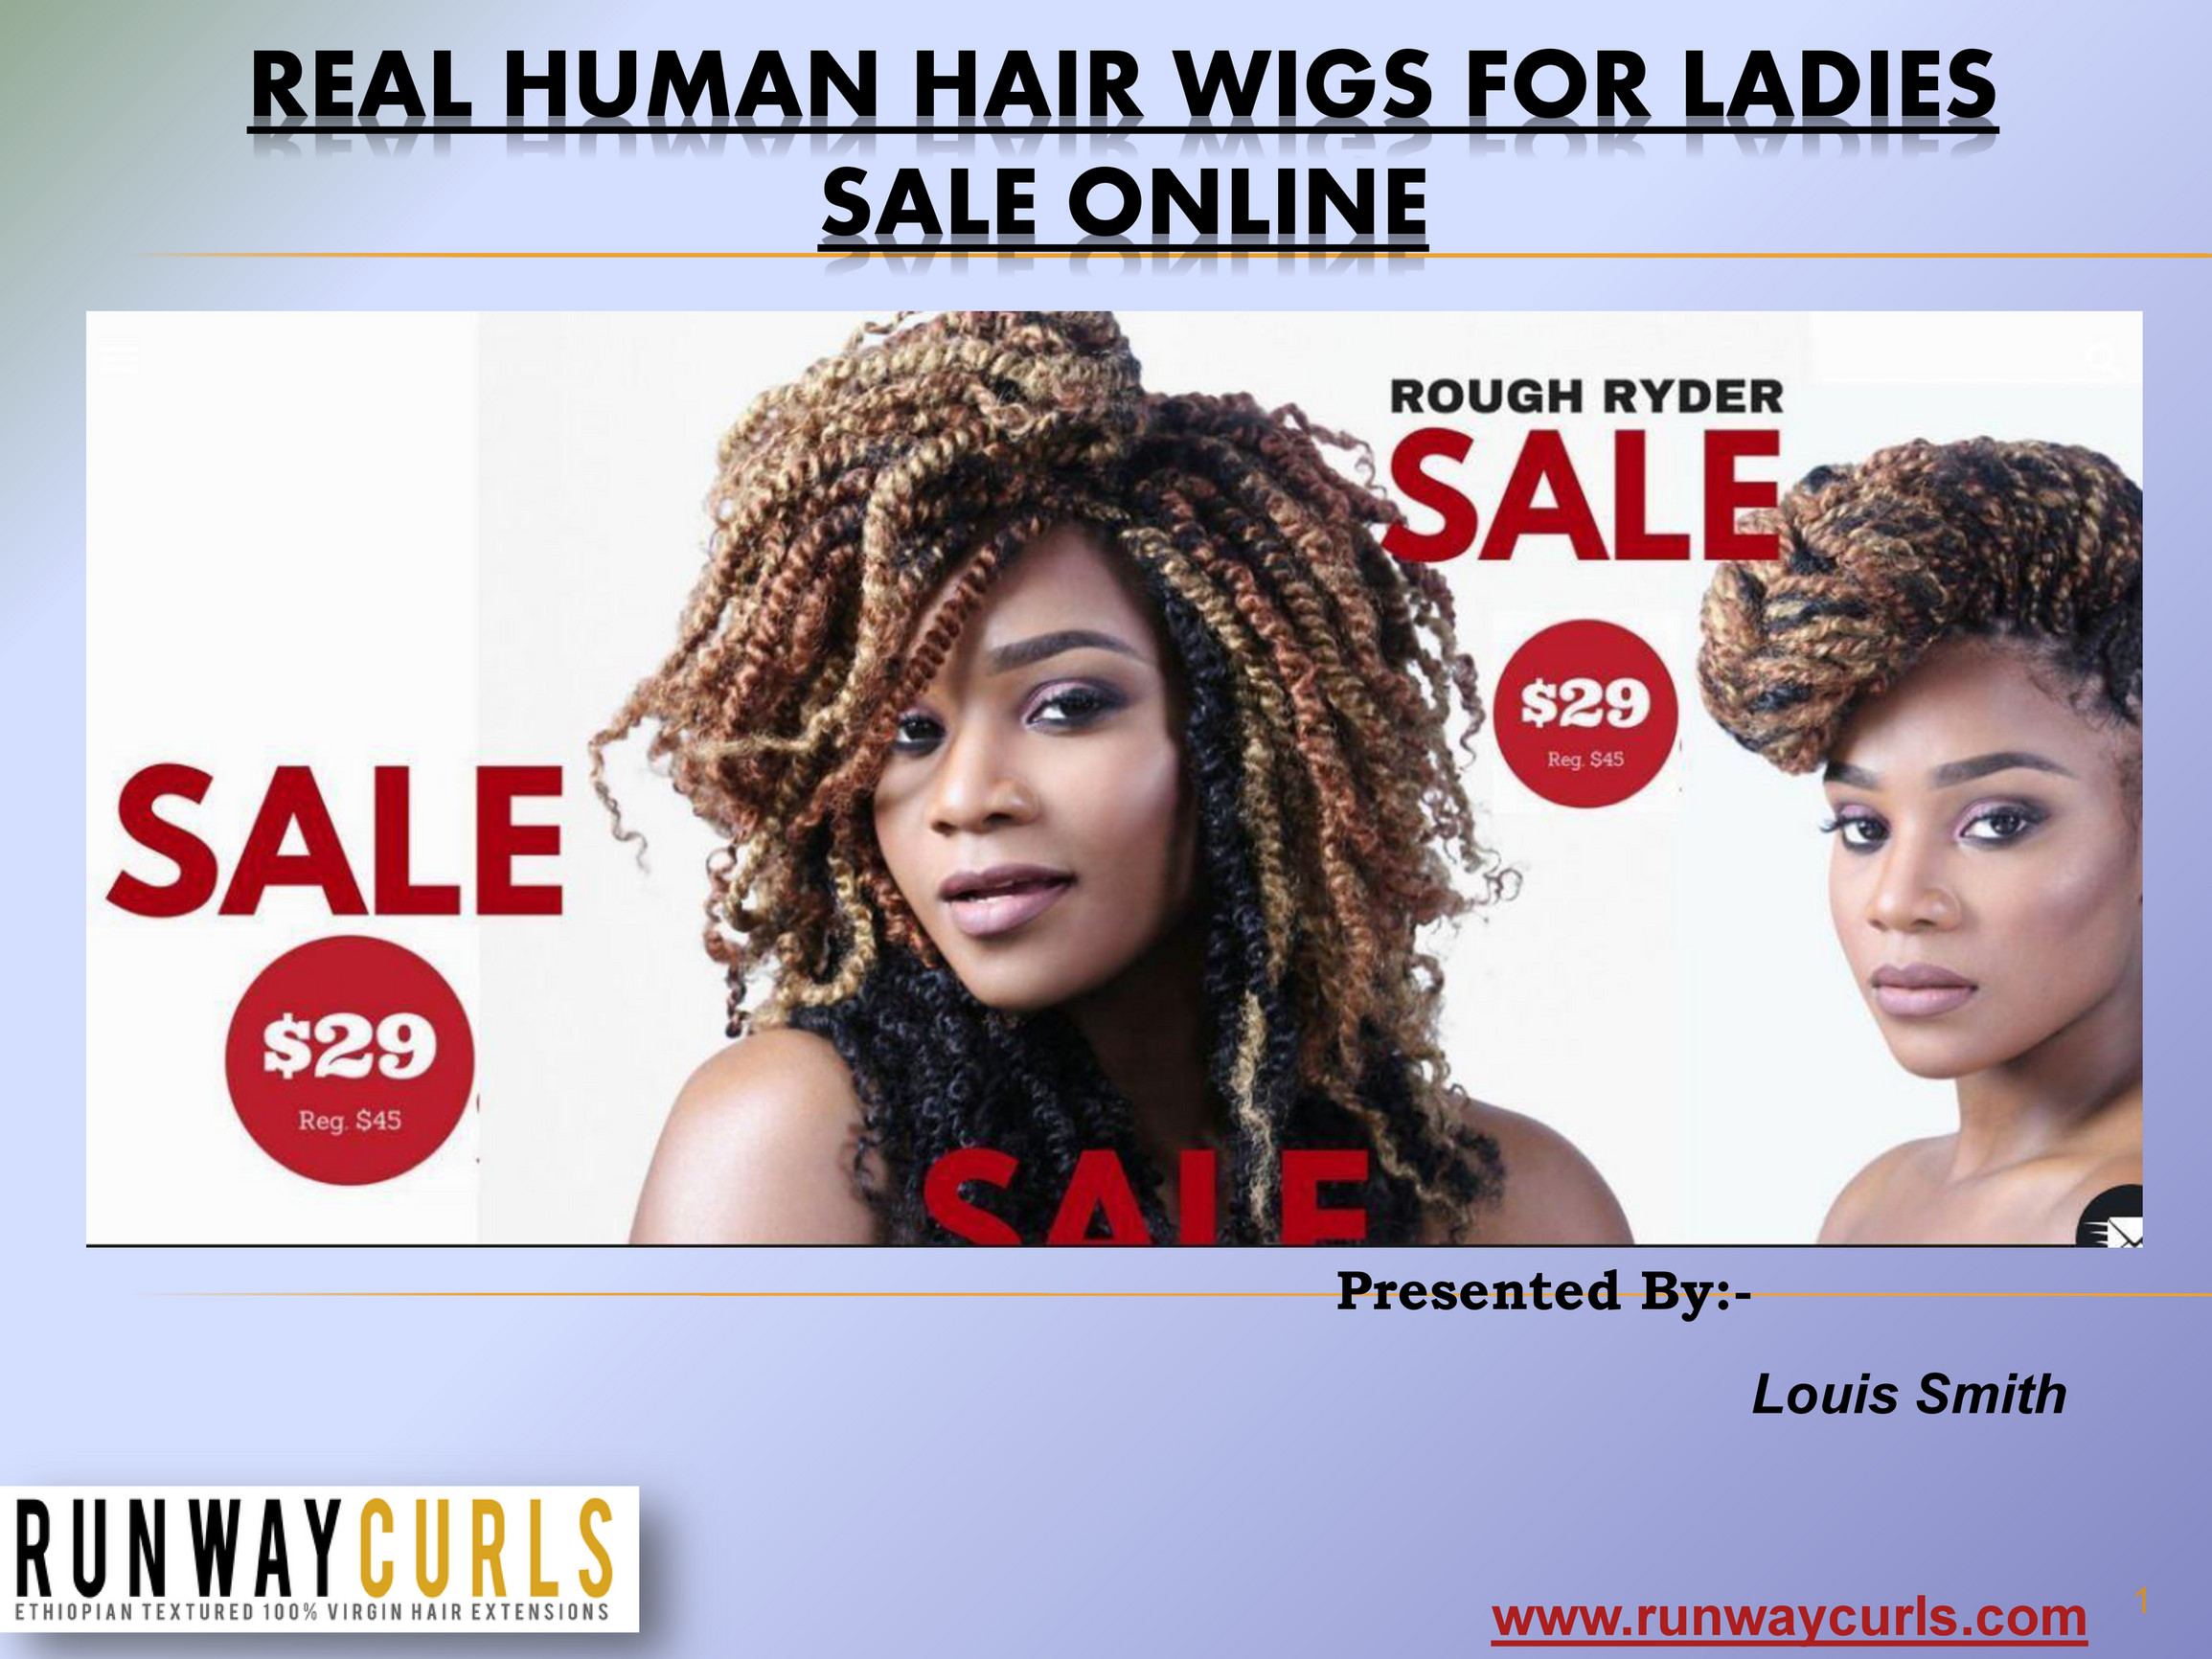 Runway Curls - Real Human Hair Wigs for Ladies Sale Online - Page 5 -  Created with 